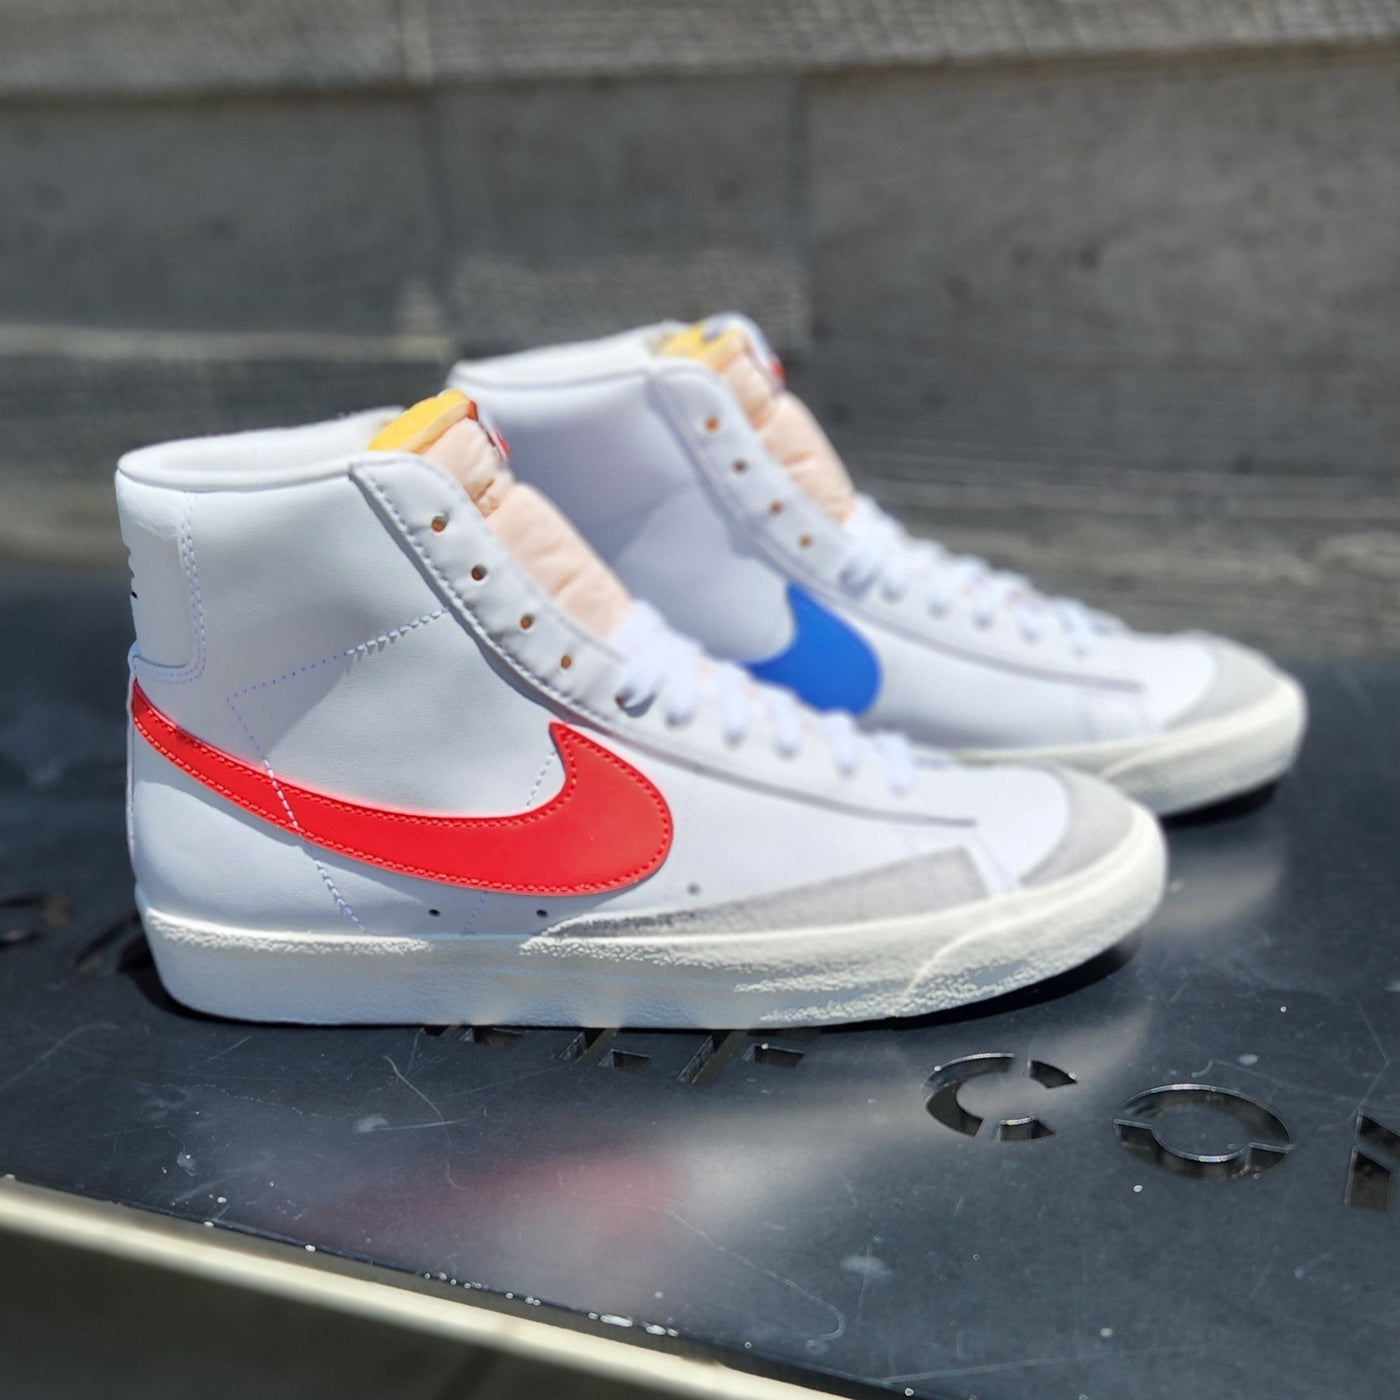 Nike Blazer Mid '77 Vintage Blue And Red Swooshes